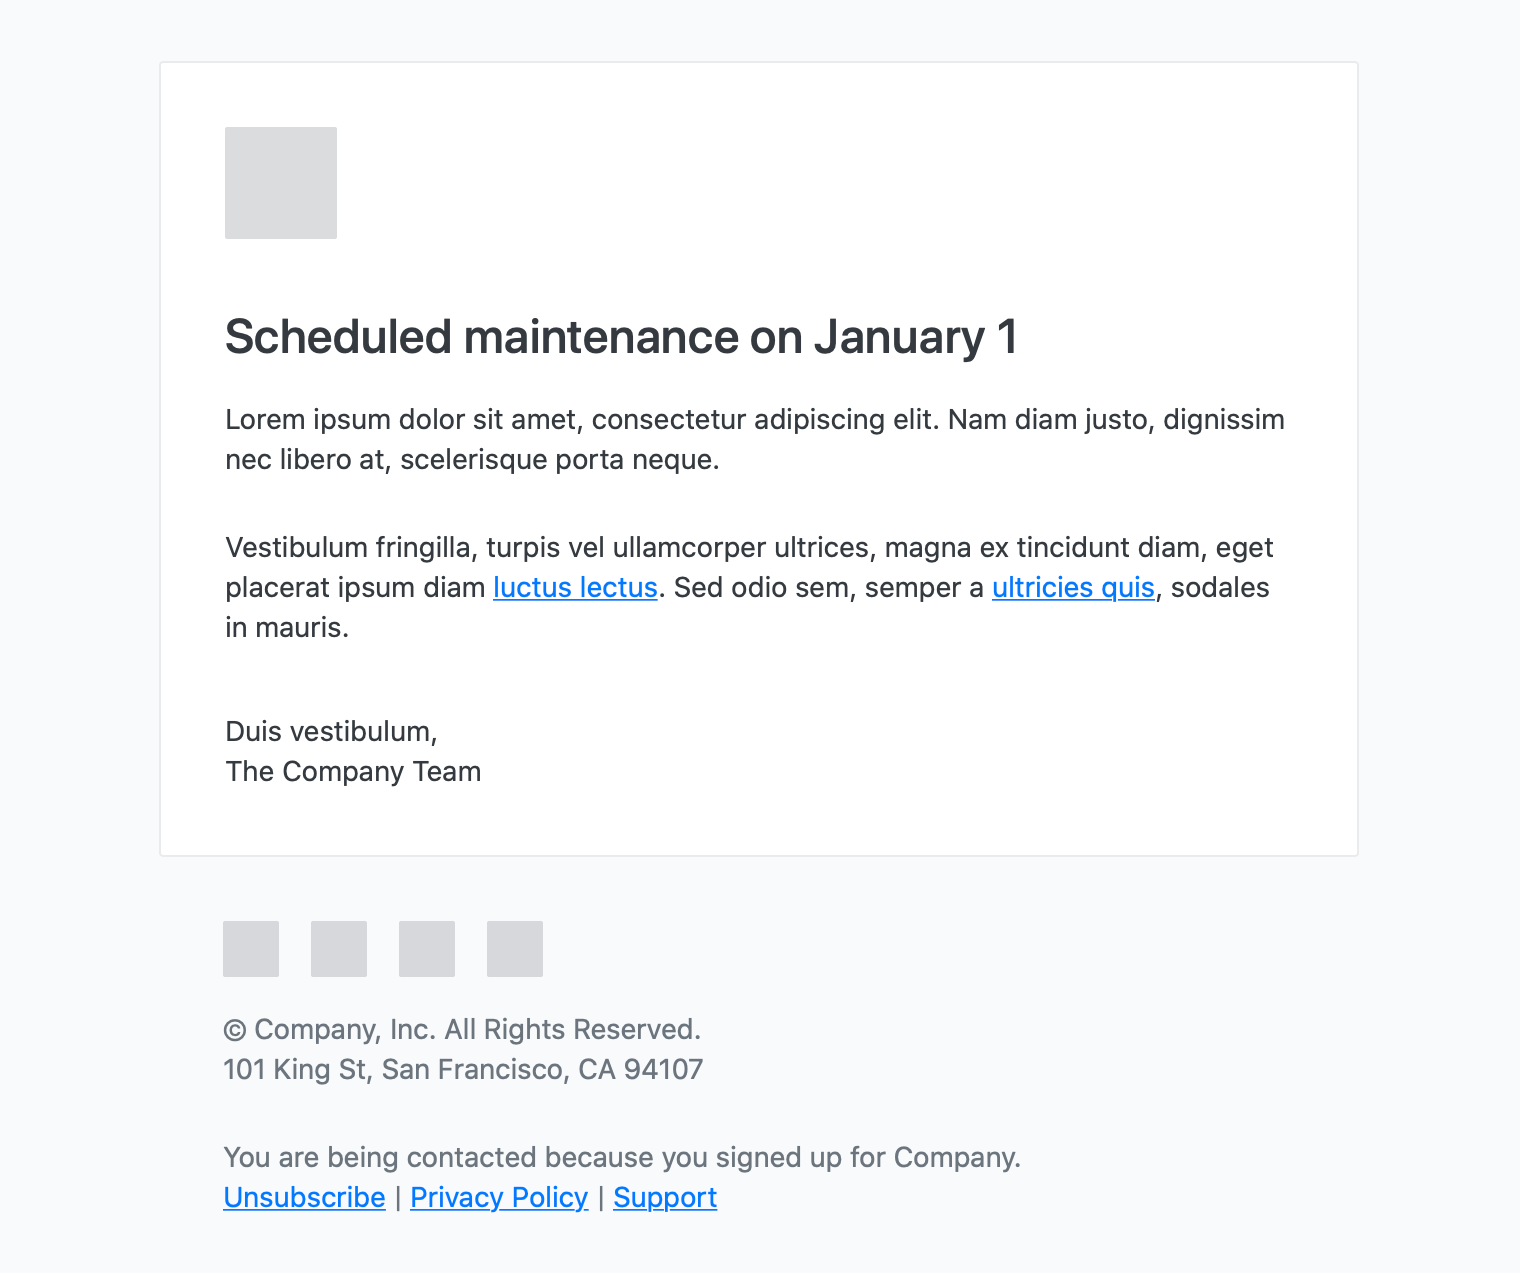 Scheduled Maintenance Email Template